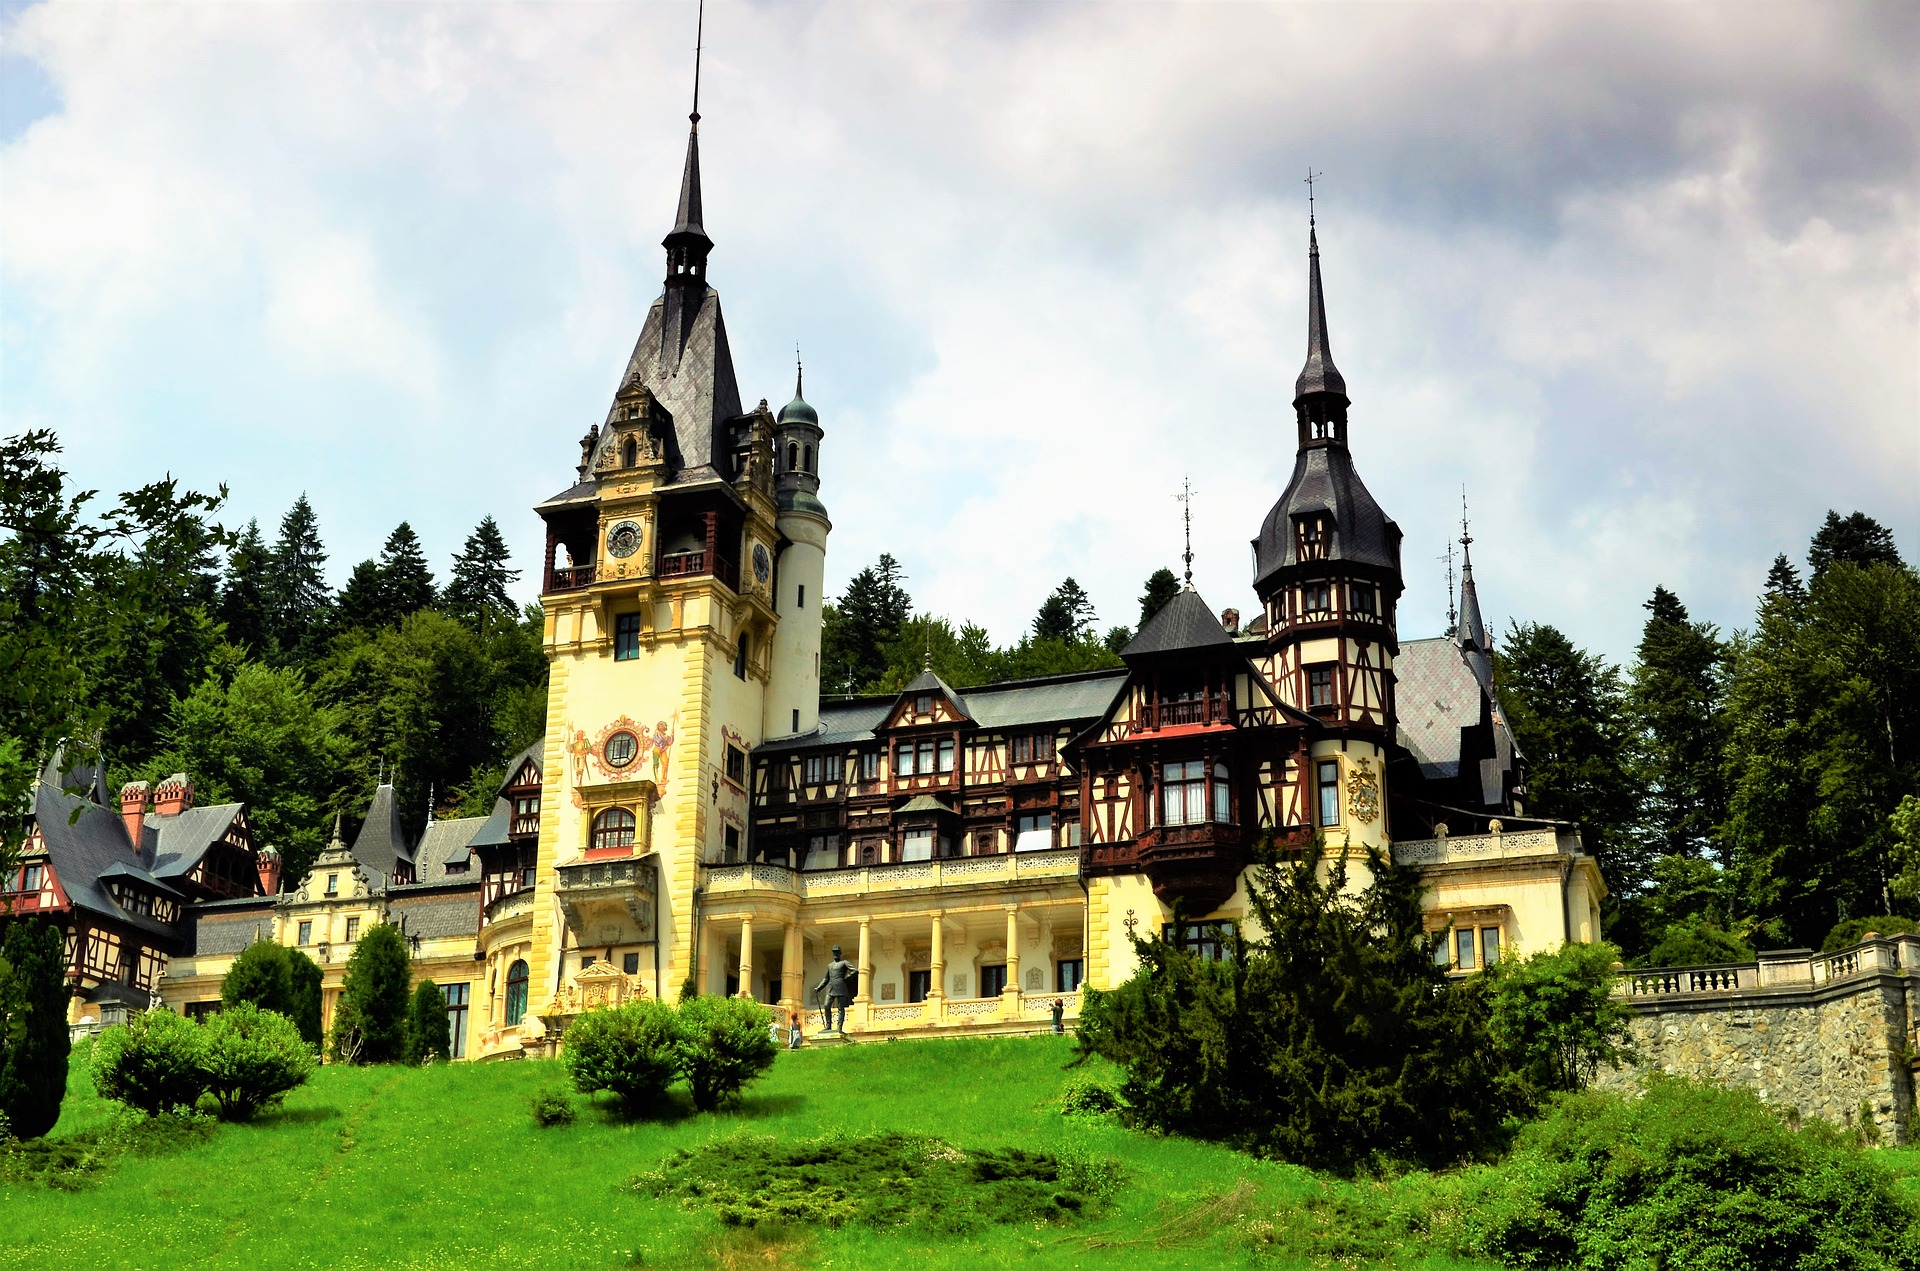 <p>Romania is a country of legend, history, and fascinating traditions. Places like Sinaia, an idyllic mountain villiage with one of the most beauftiful castles in the world, will enchant you. Romania's also one of the cheapest destinations to travel to, as its hotel rates are low.</p>